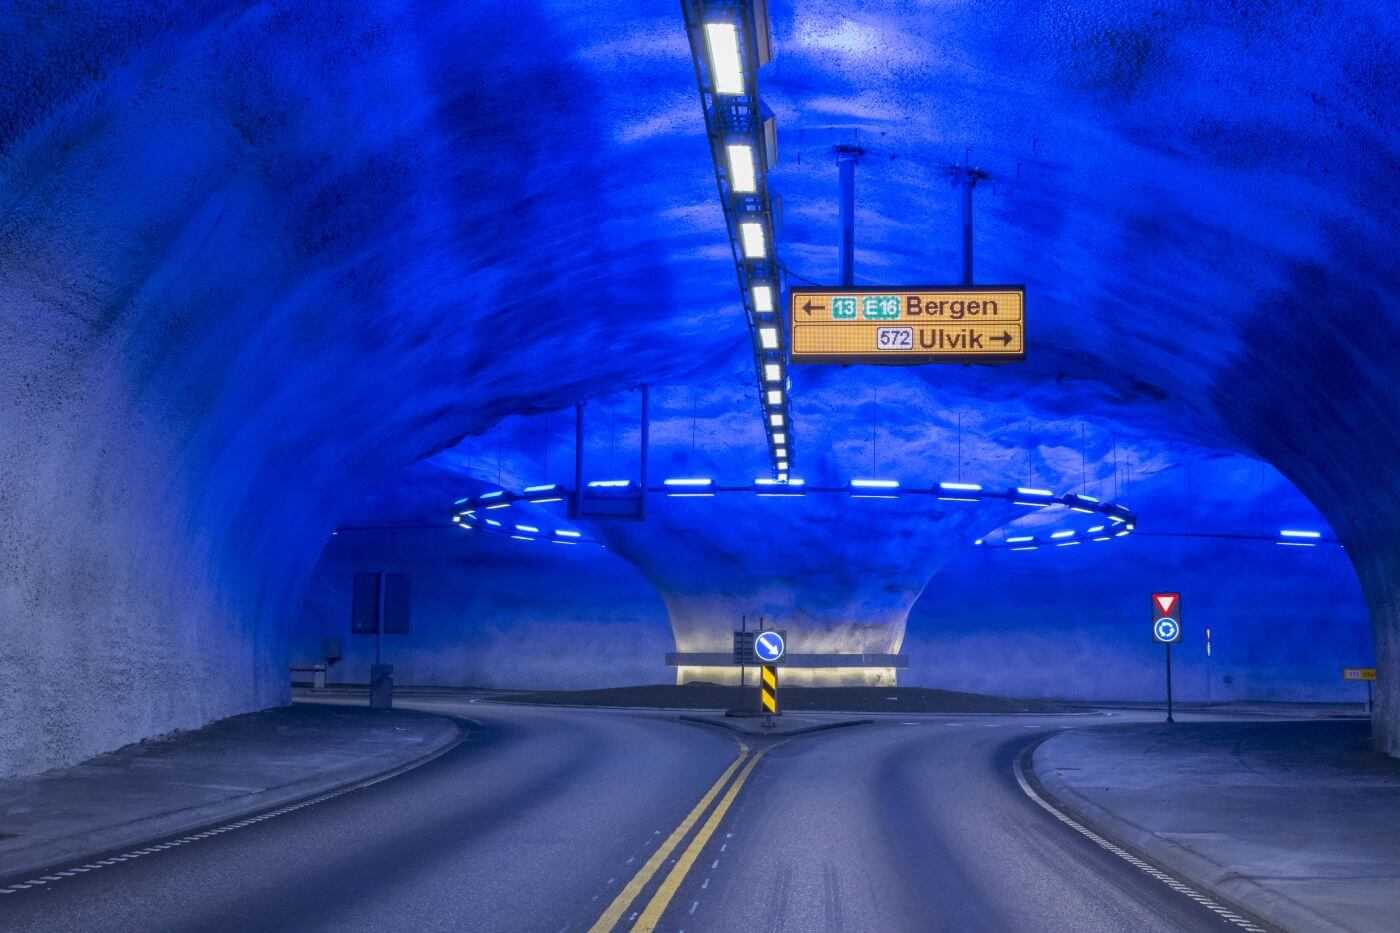 Lighting effects in the longest road tunnel in the world